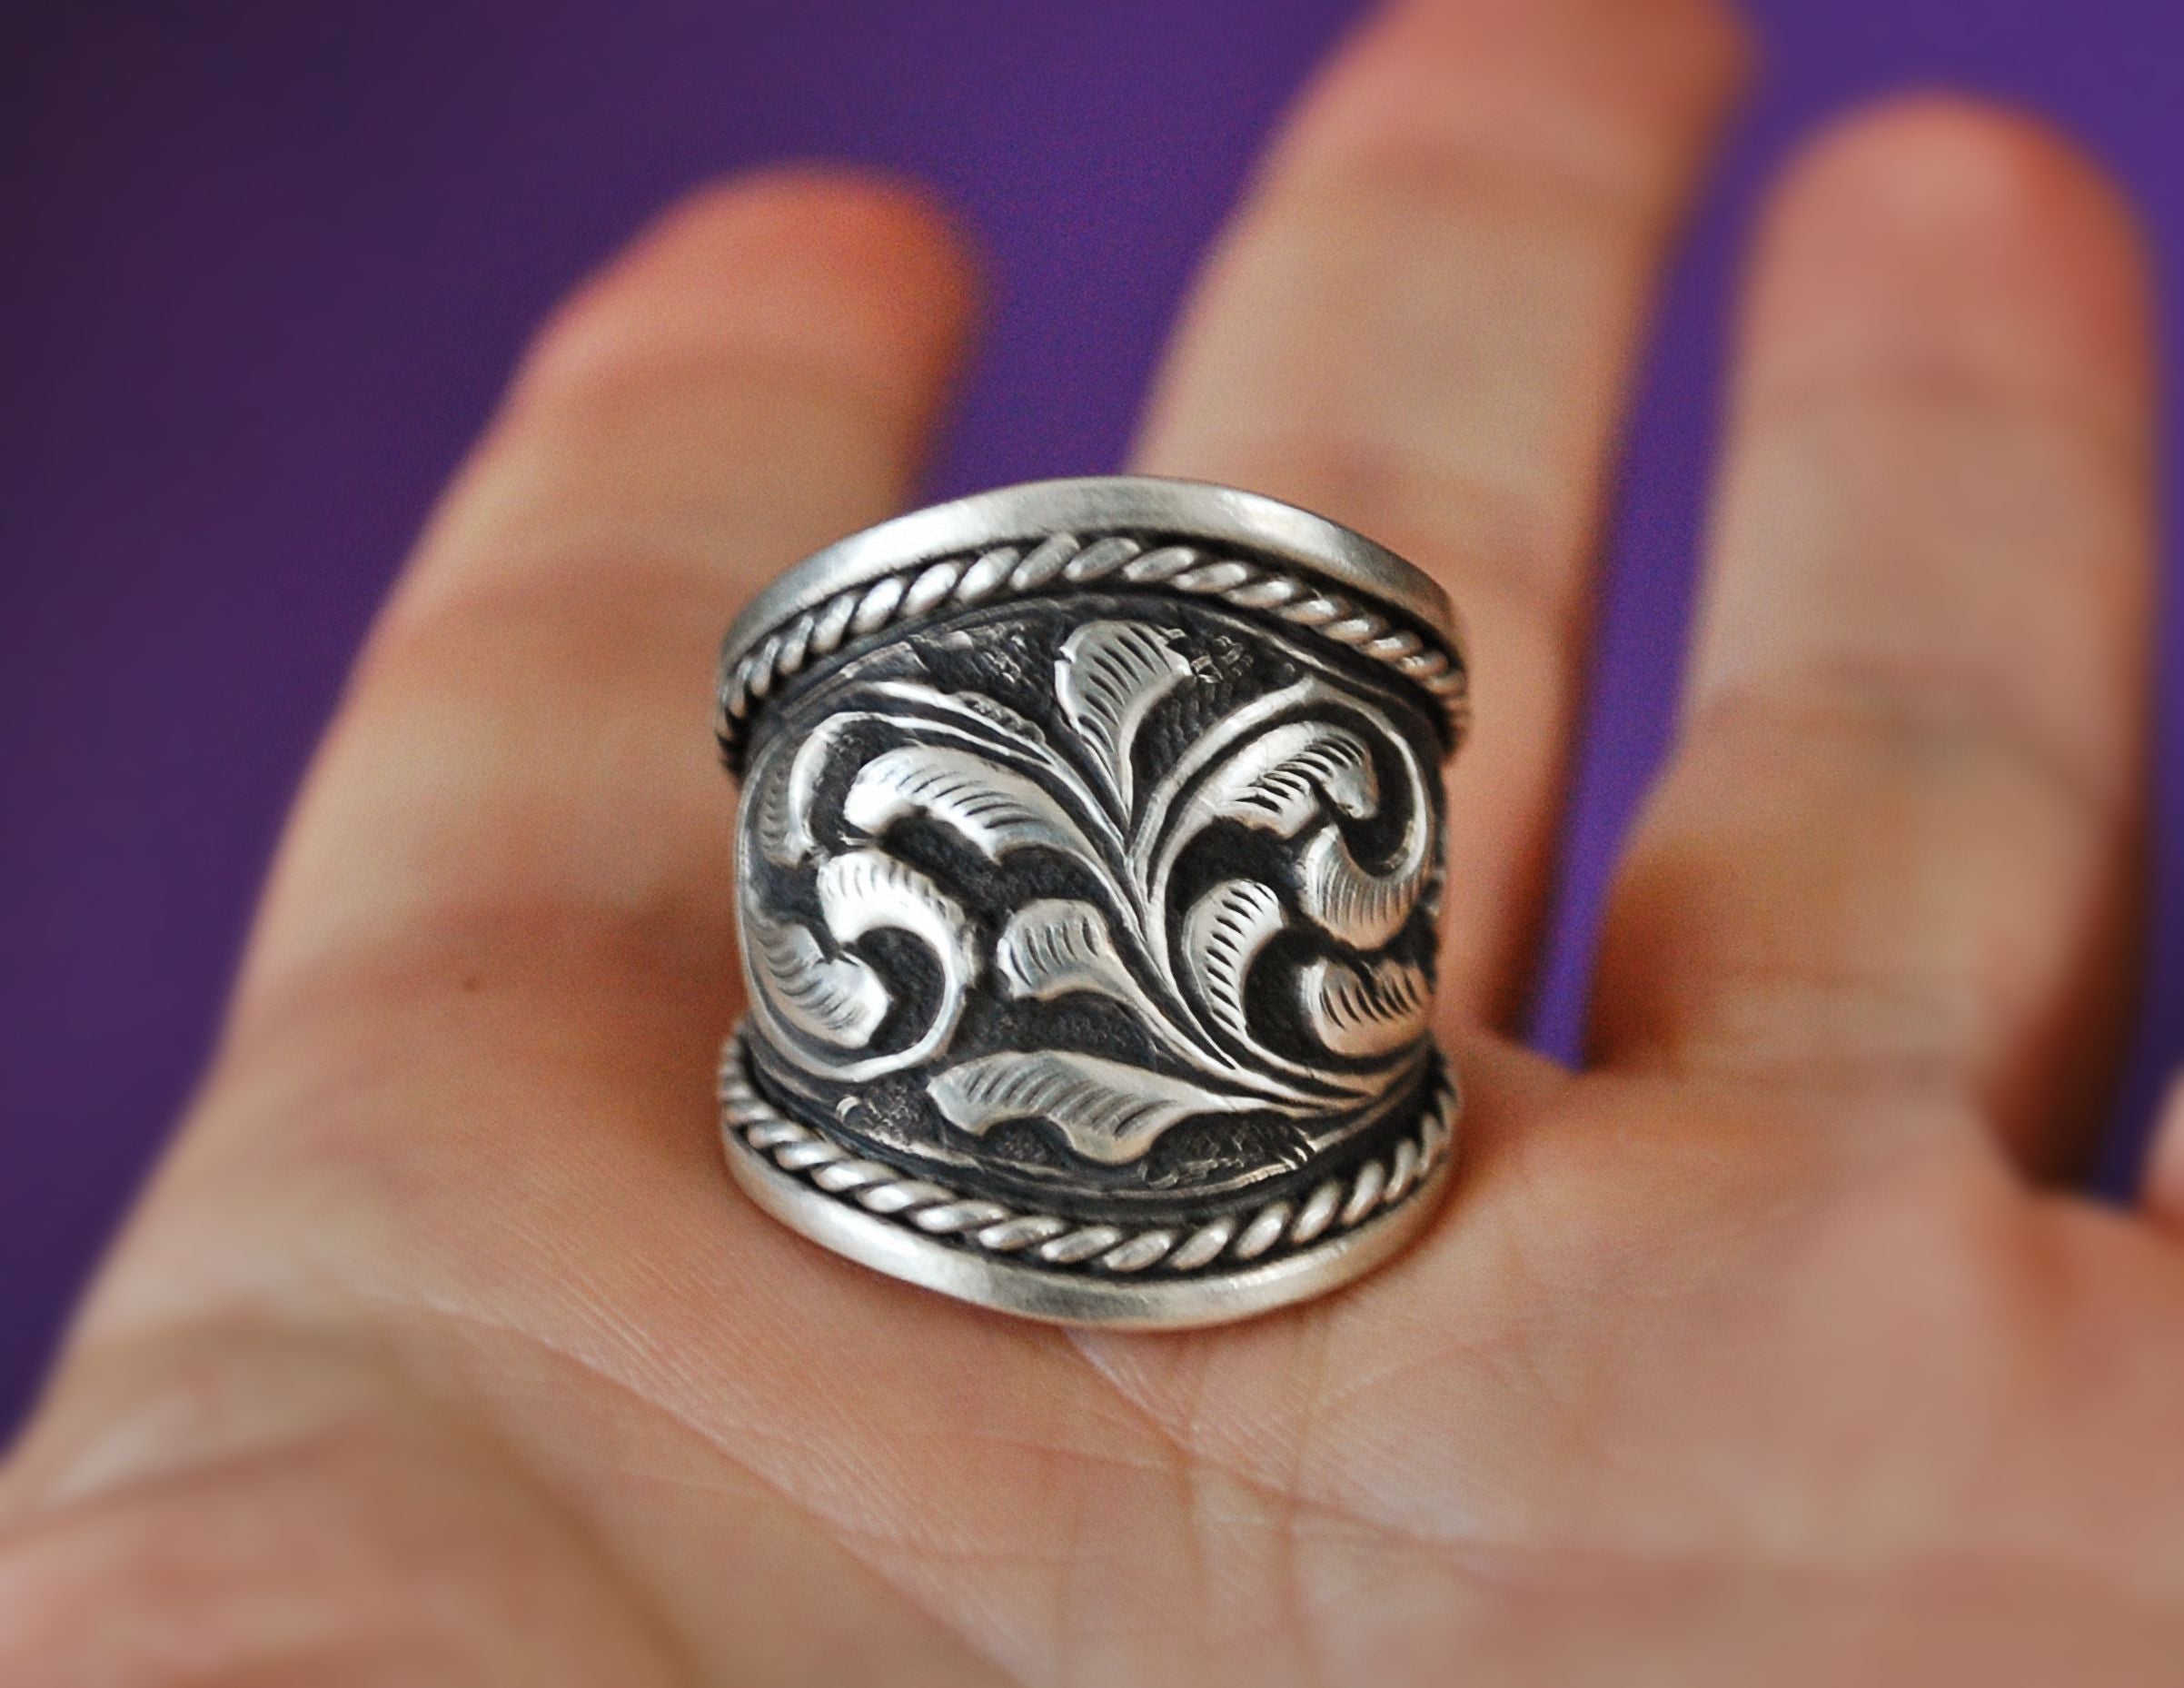 Ethnic Band Ring from India - Size 7+